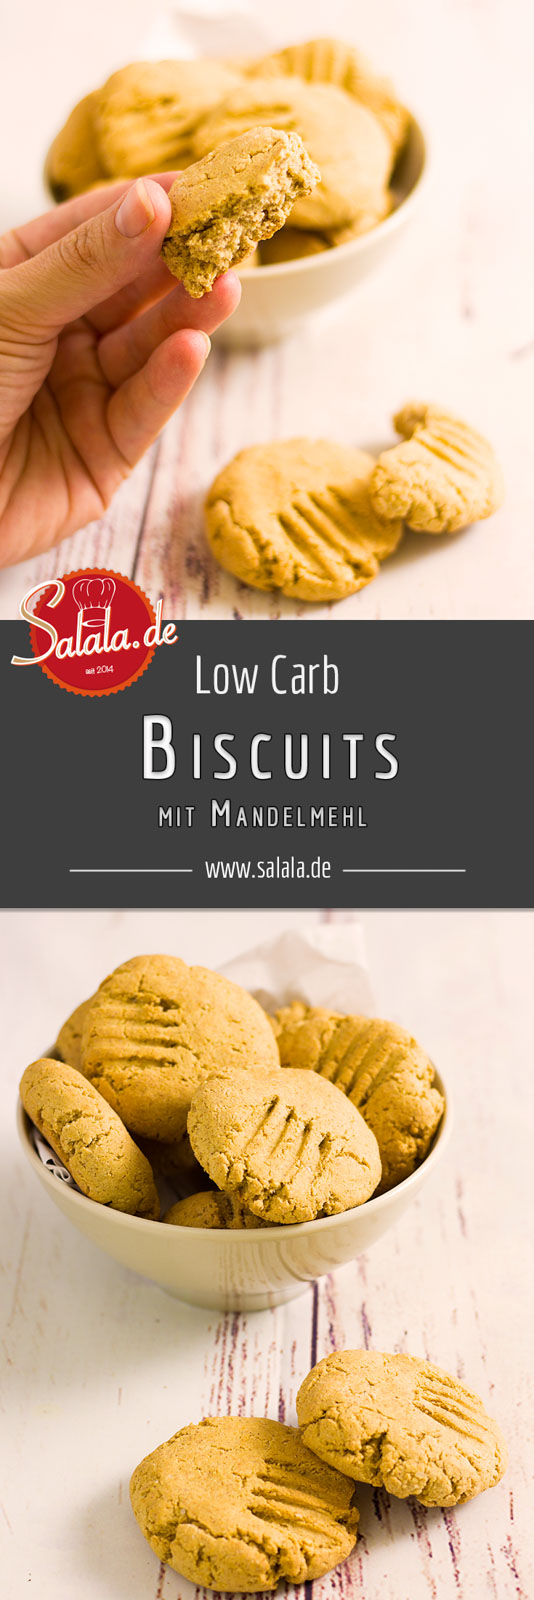 Keto Mandel Biscuits - by salala.de - Rezept Low Carb Beilage backen ohne Mehll #lowcarb #keto #mehlfrei #backen